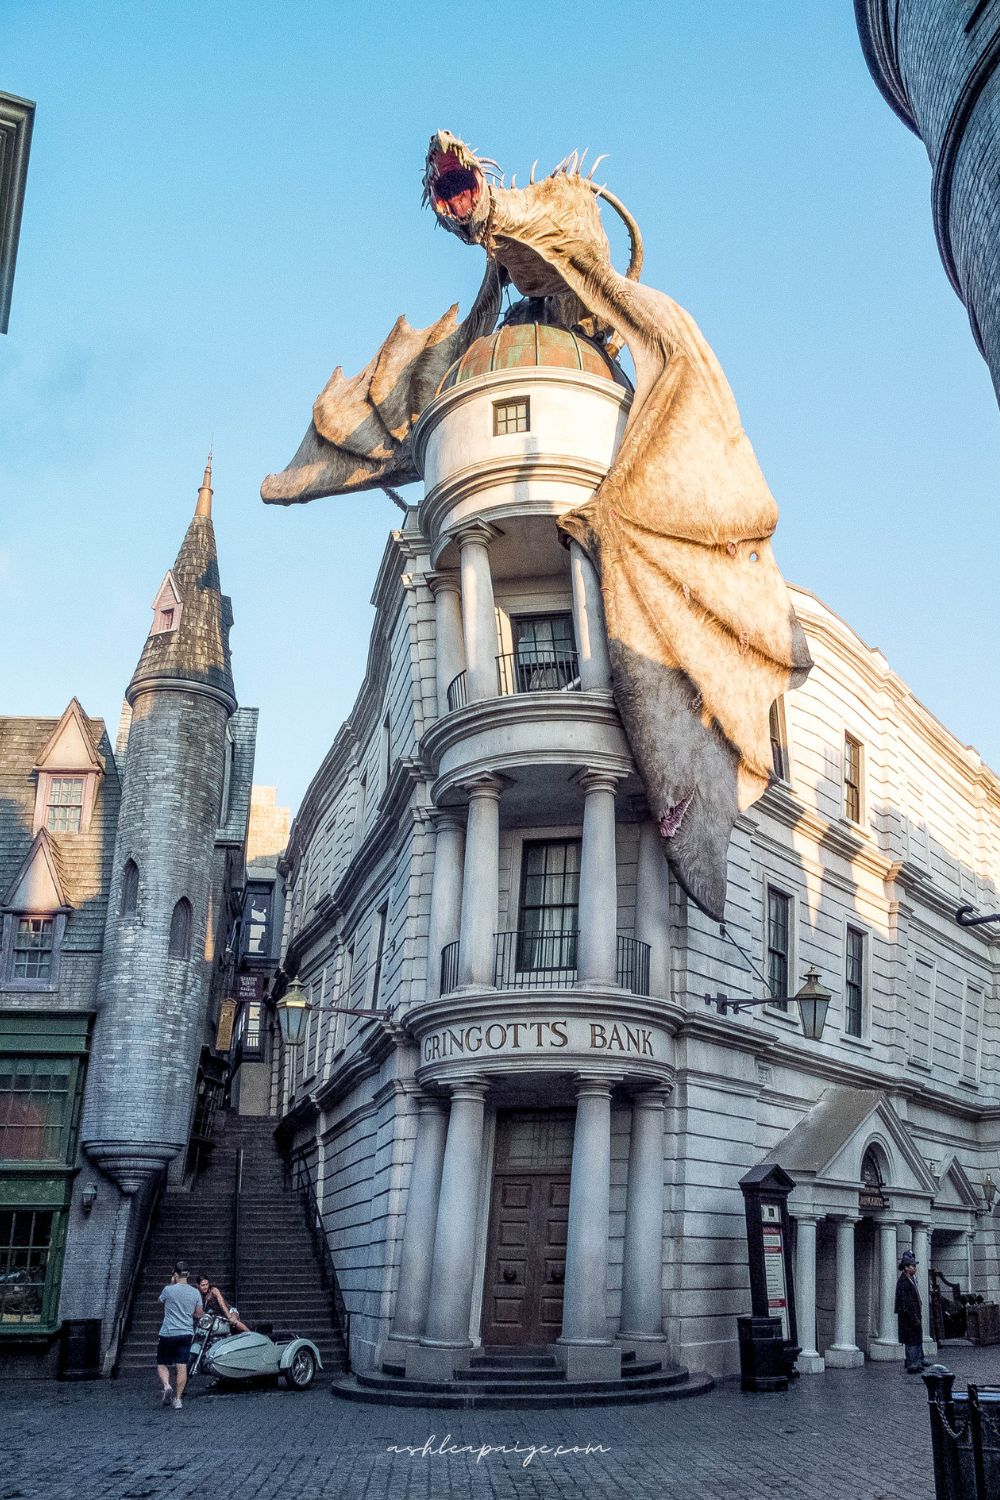 25 Photos That Will Inspire You to Visit the Wizarding World of Harry Potter